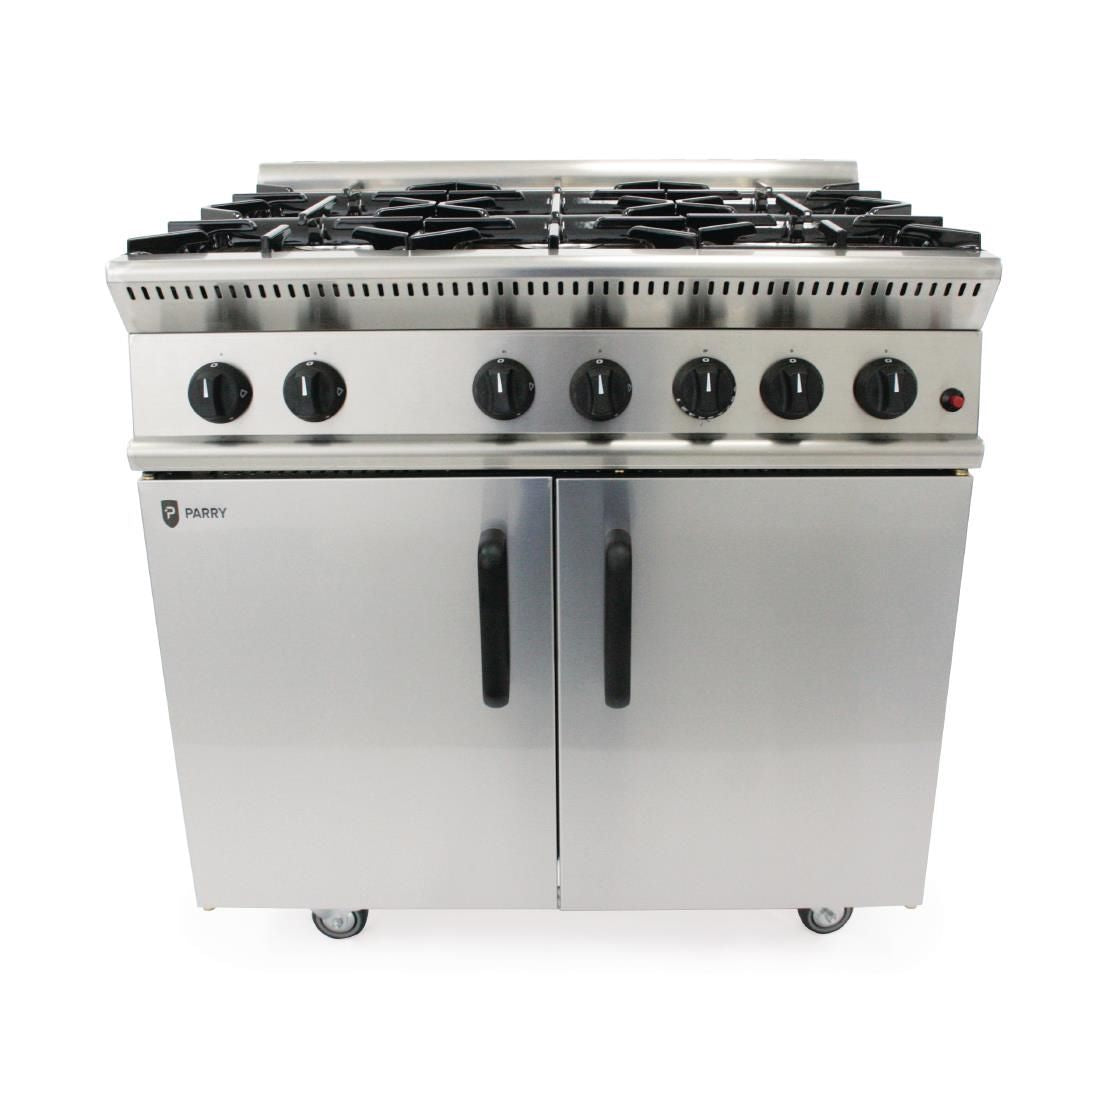 CD457 Parry 600 Series Natural Gas Oven Range GB6N